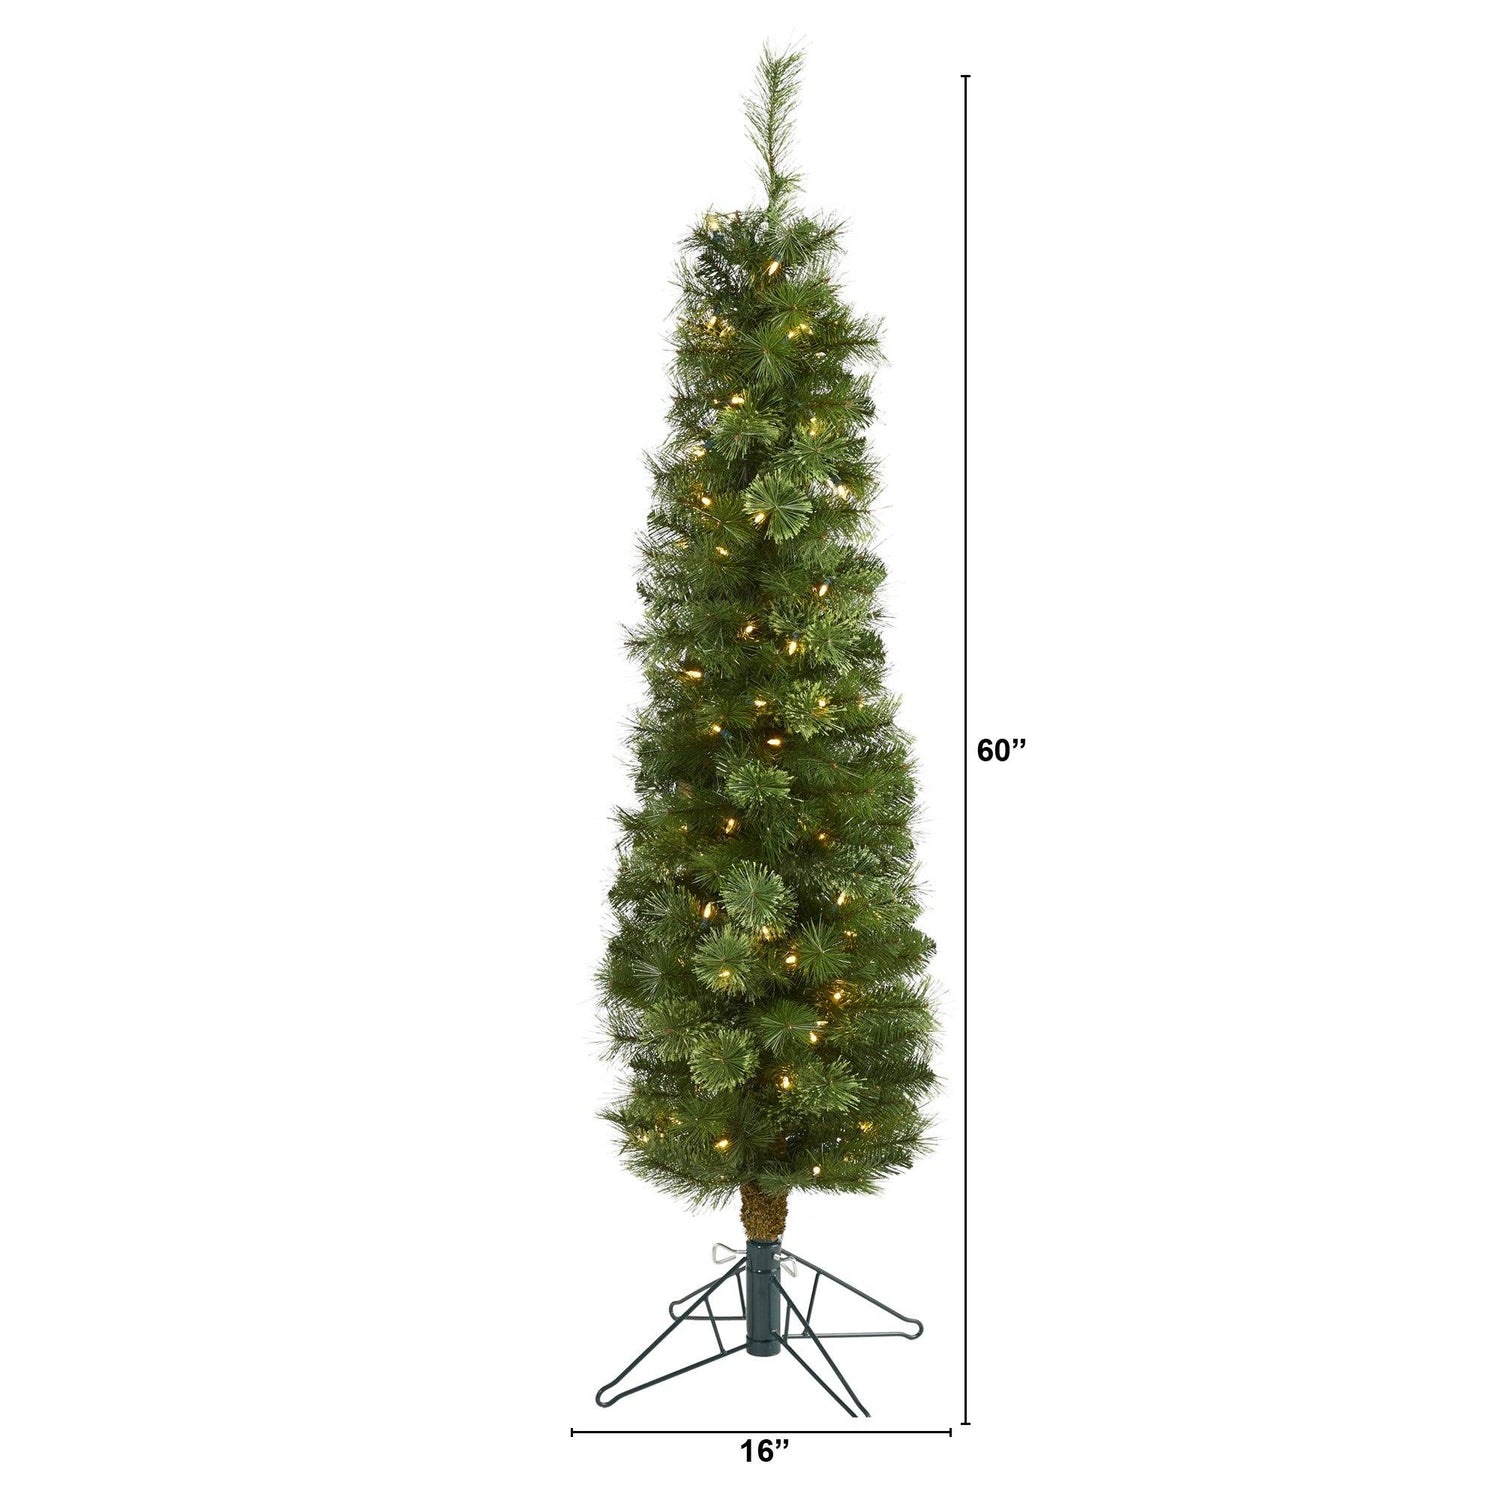 5' Green Pencil Artificial Christmas Tree with 100 Clear (Multifunction) LED Lights and 198 Bendable Branches